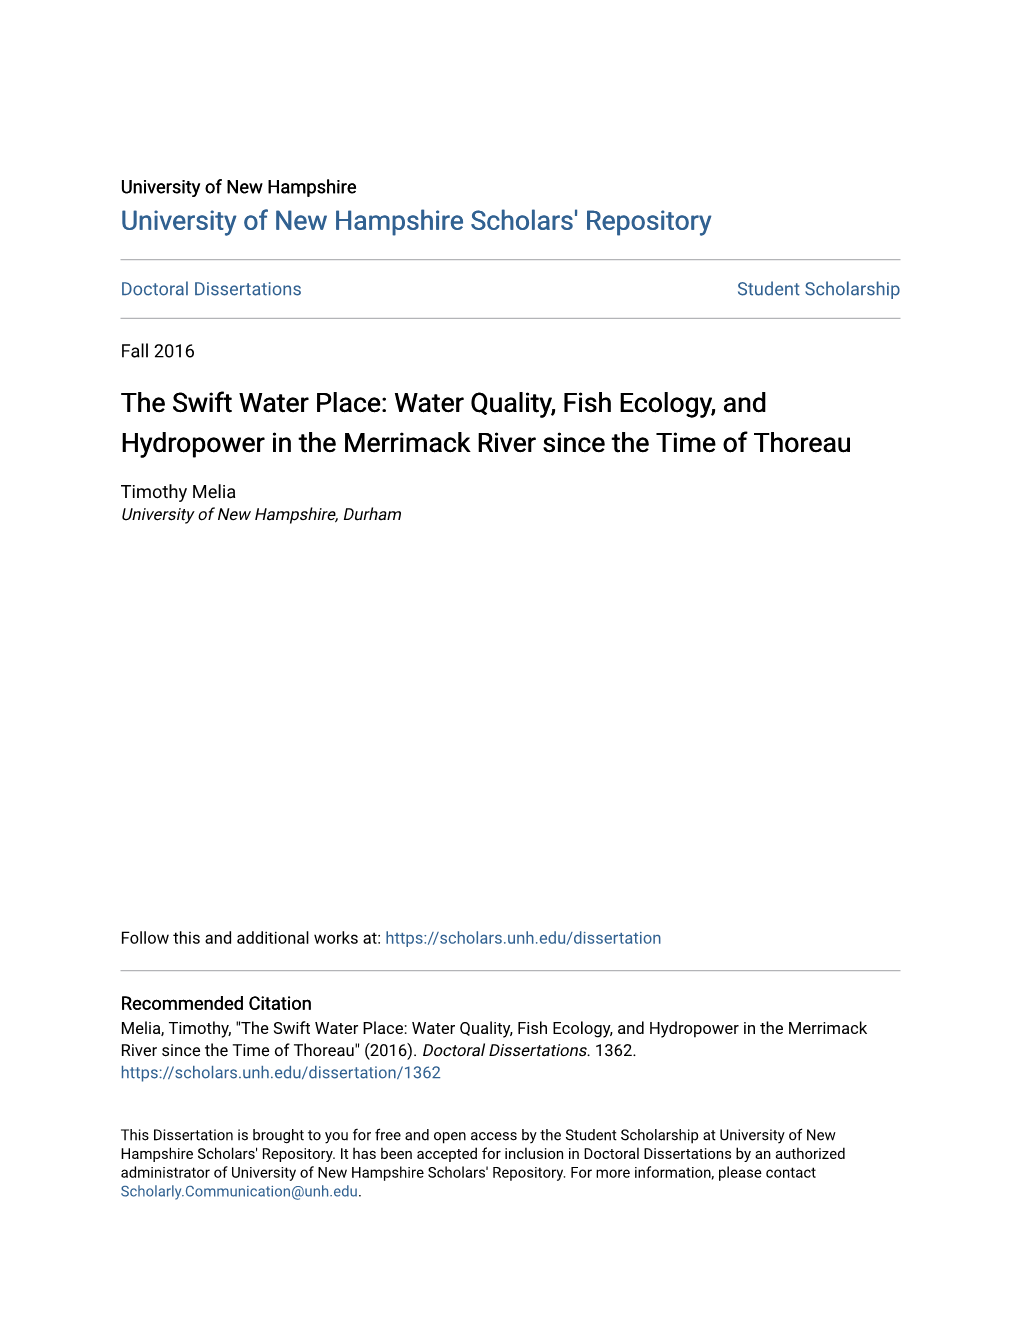 The Swift Water Place: Water Quality, Fish Ecology, and Hydropower in the Merrimack River Since the Time of Thoreau